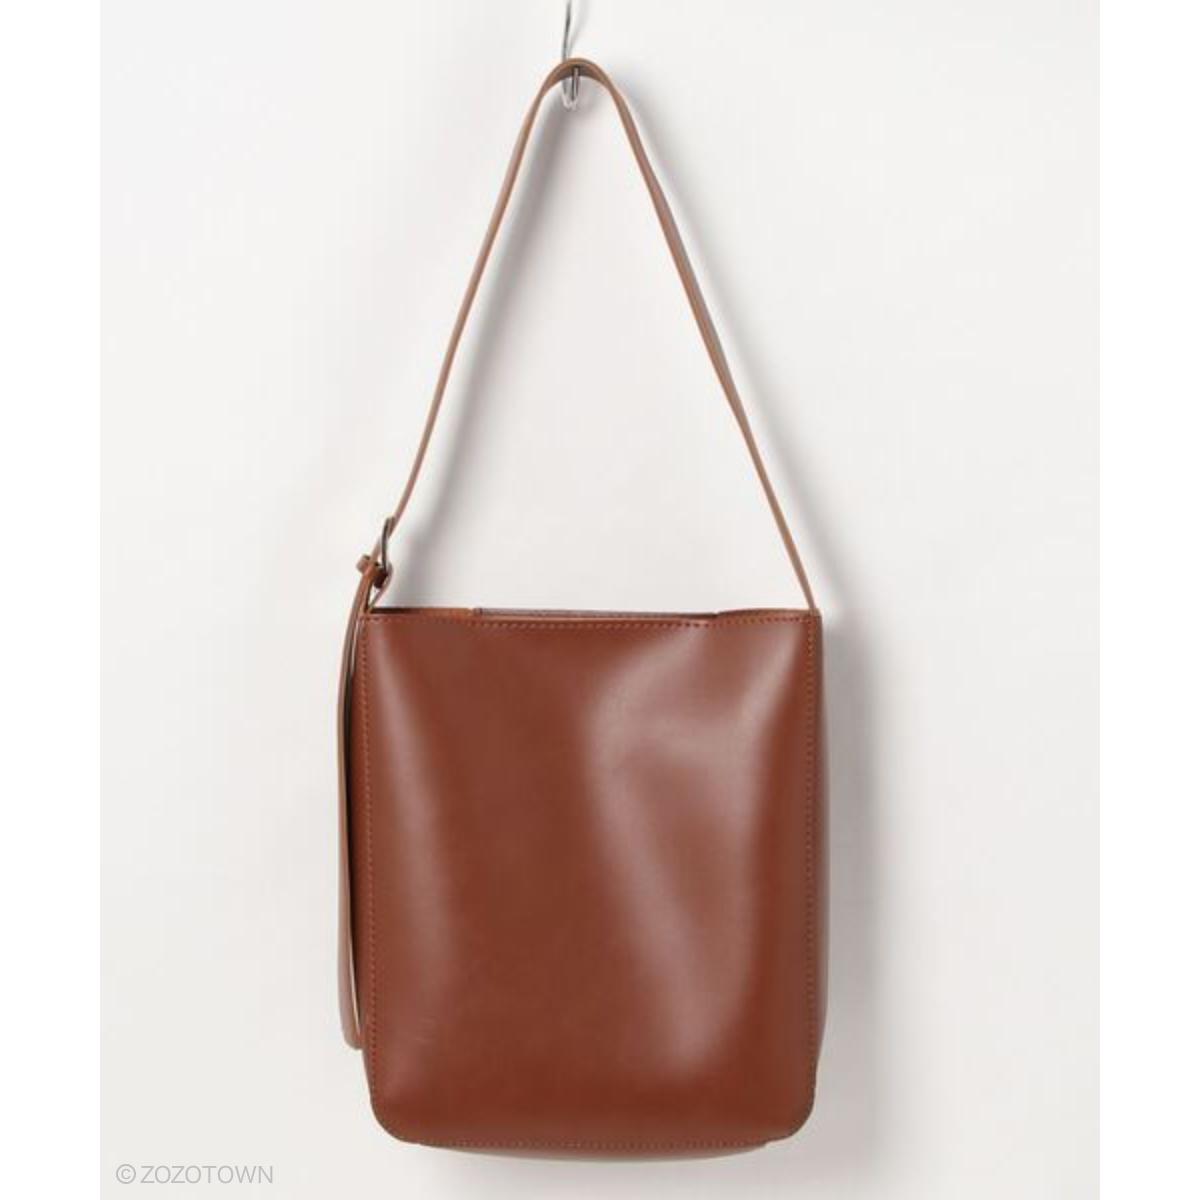 lawgy】 useful square shoulder bag｜Yahoo!フリマ（旧PayPayフリマ）